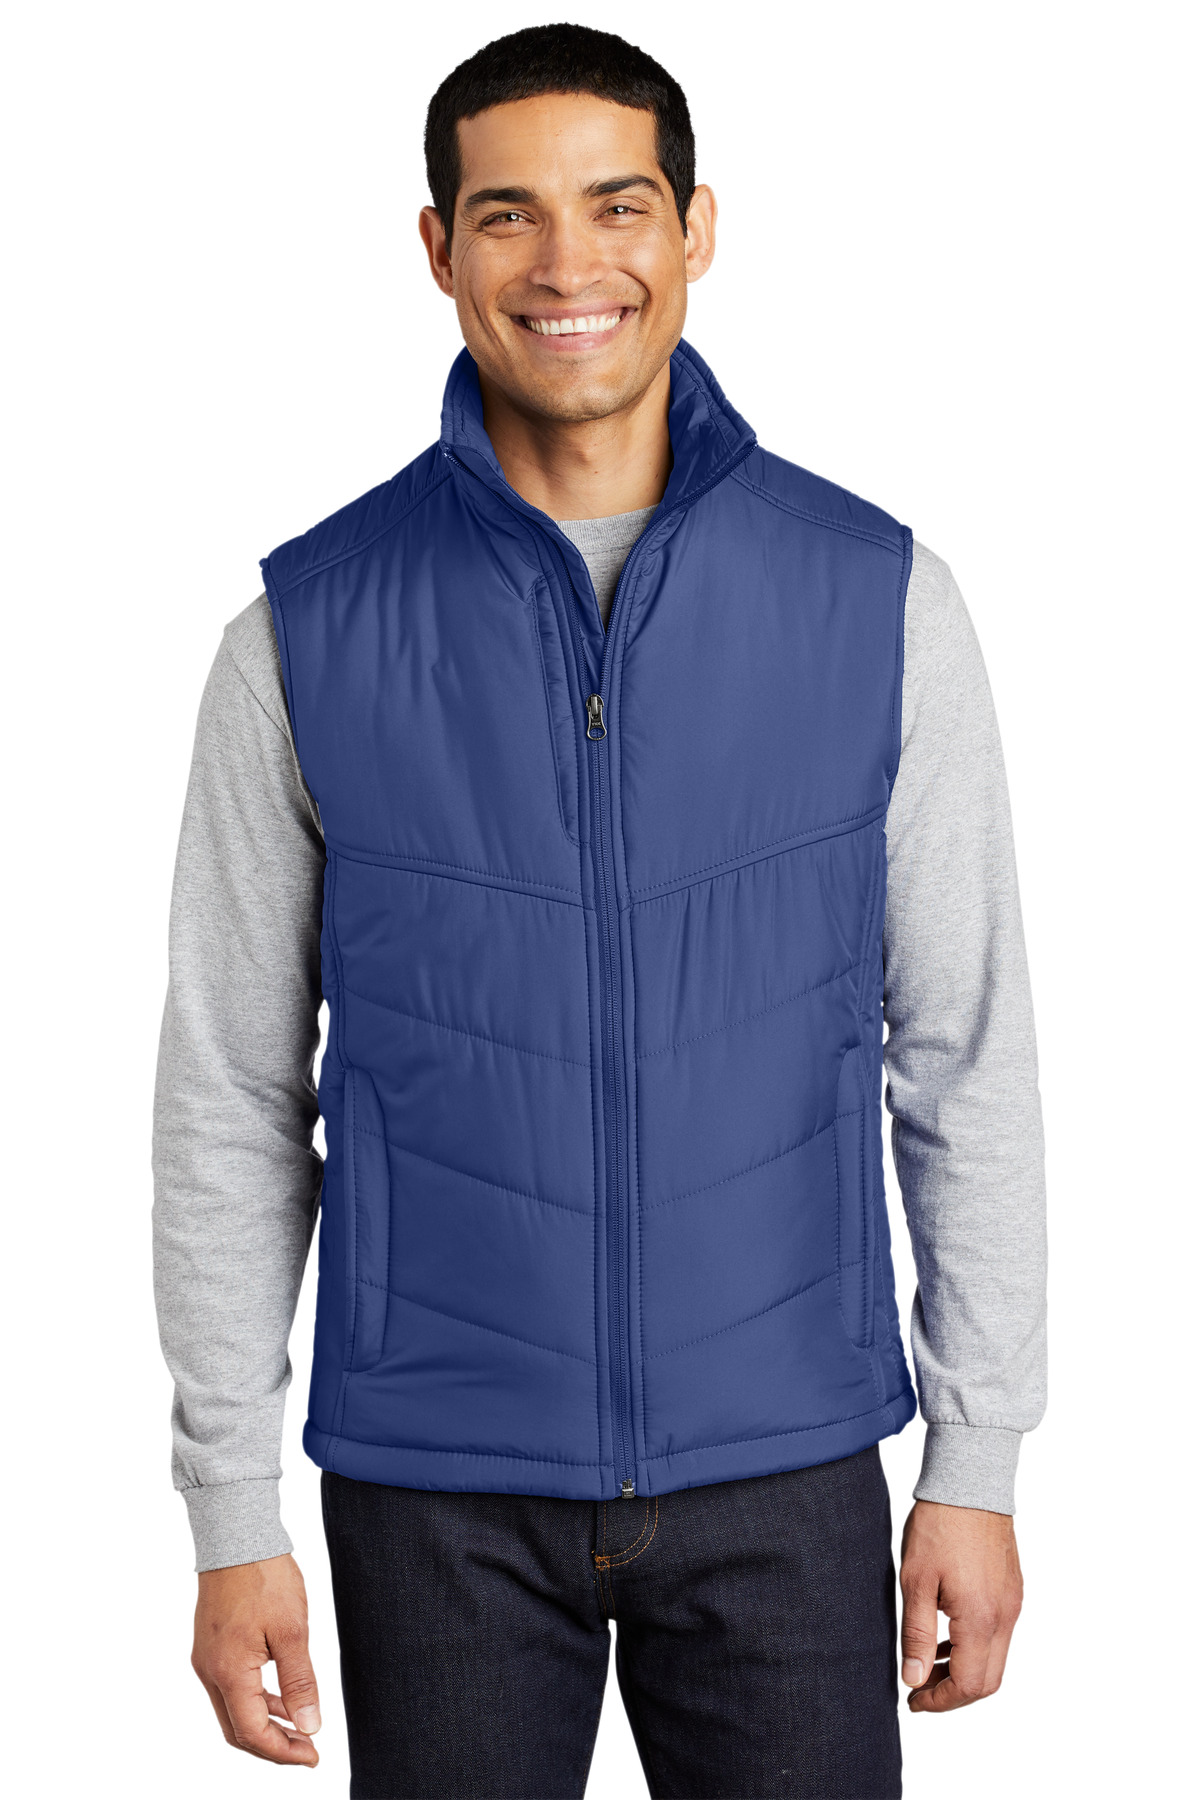 Port Authority Industrial Outerwear ® Puffy Vest.-Port Authority